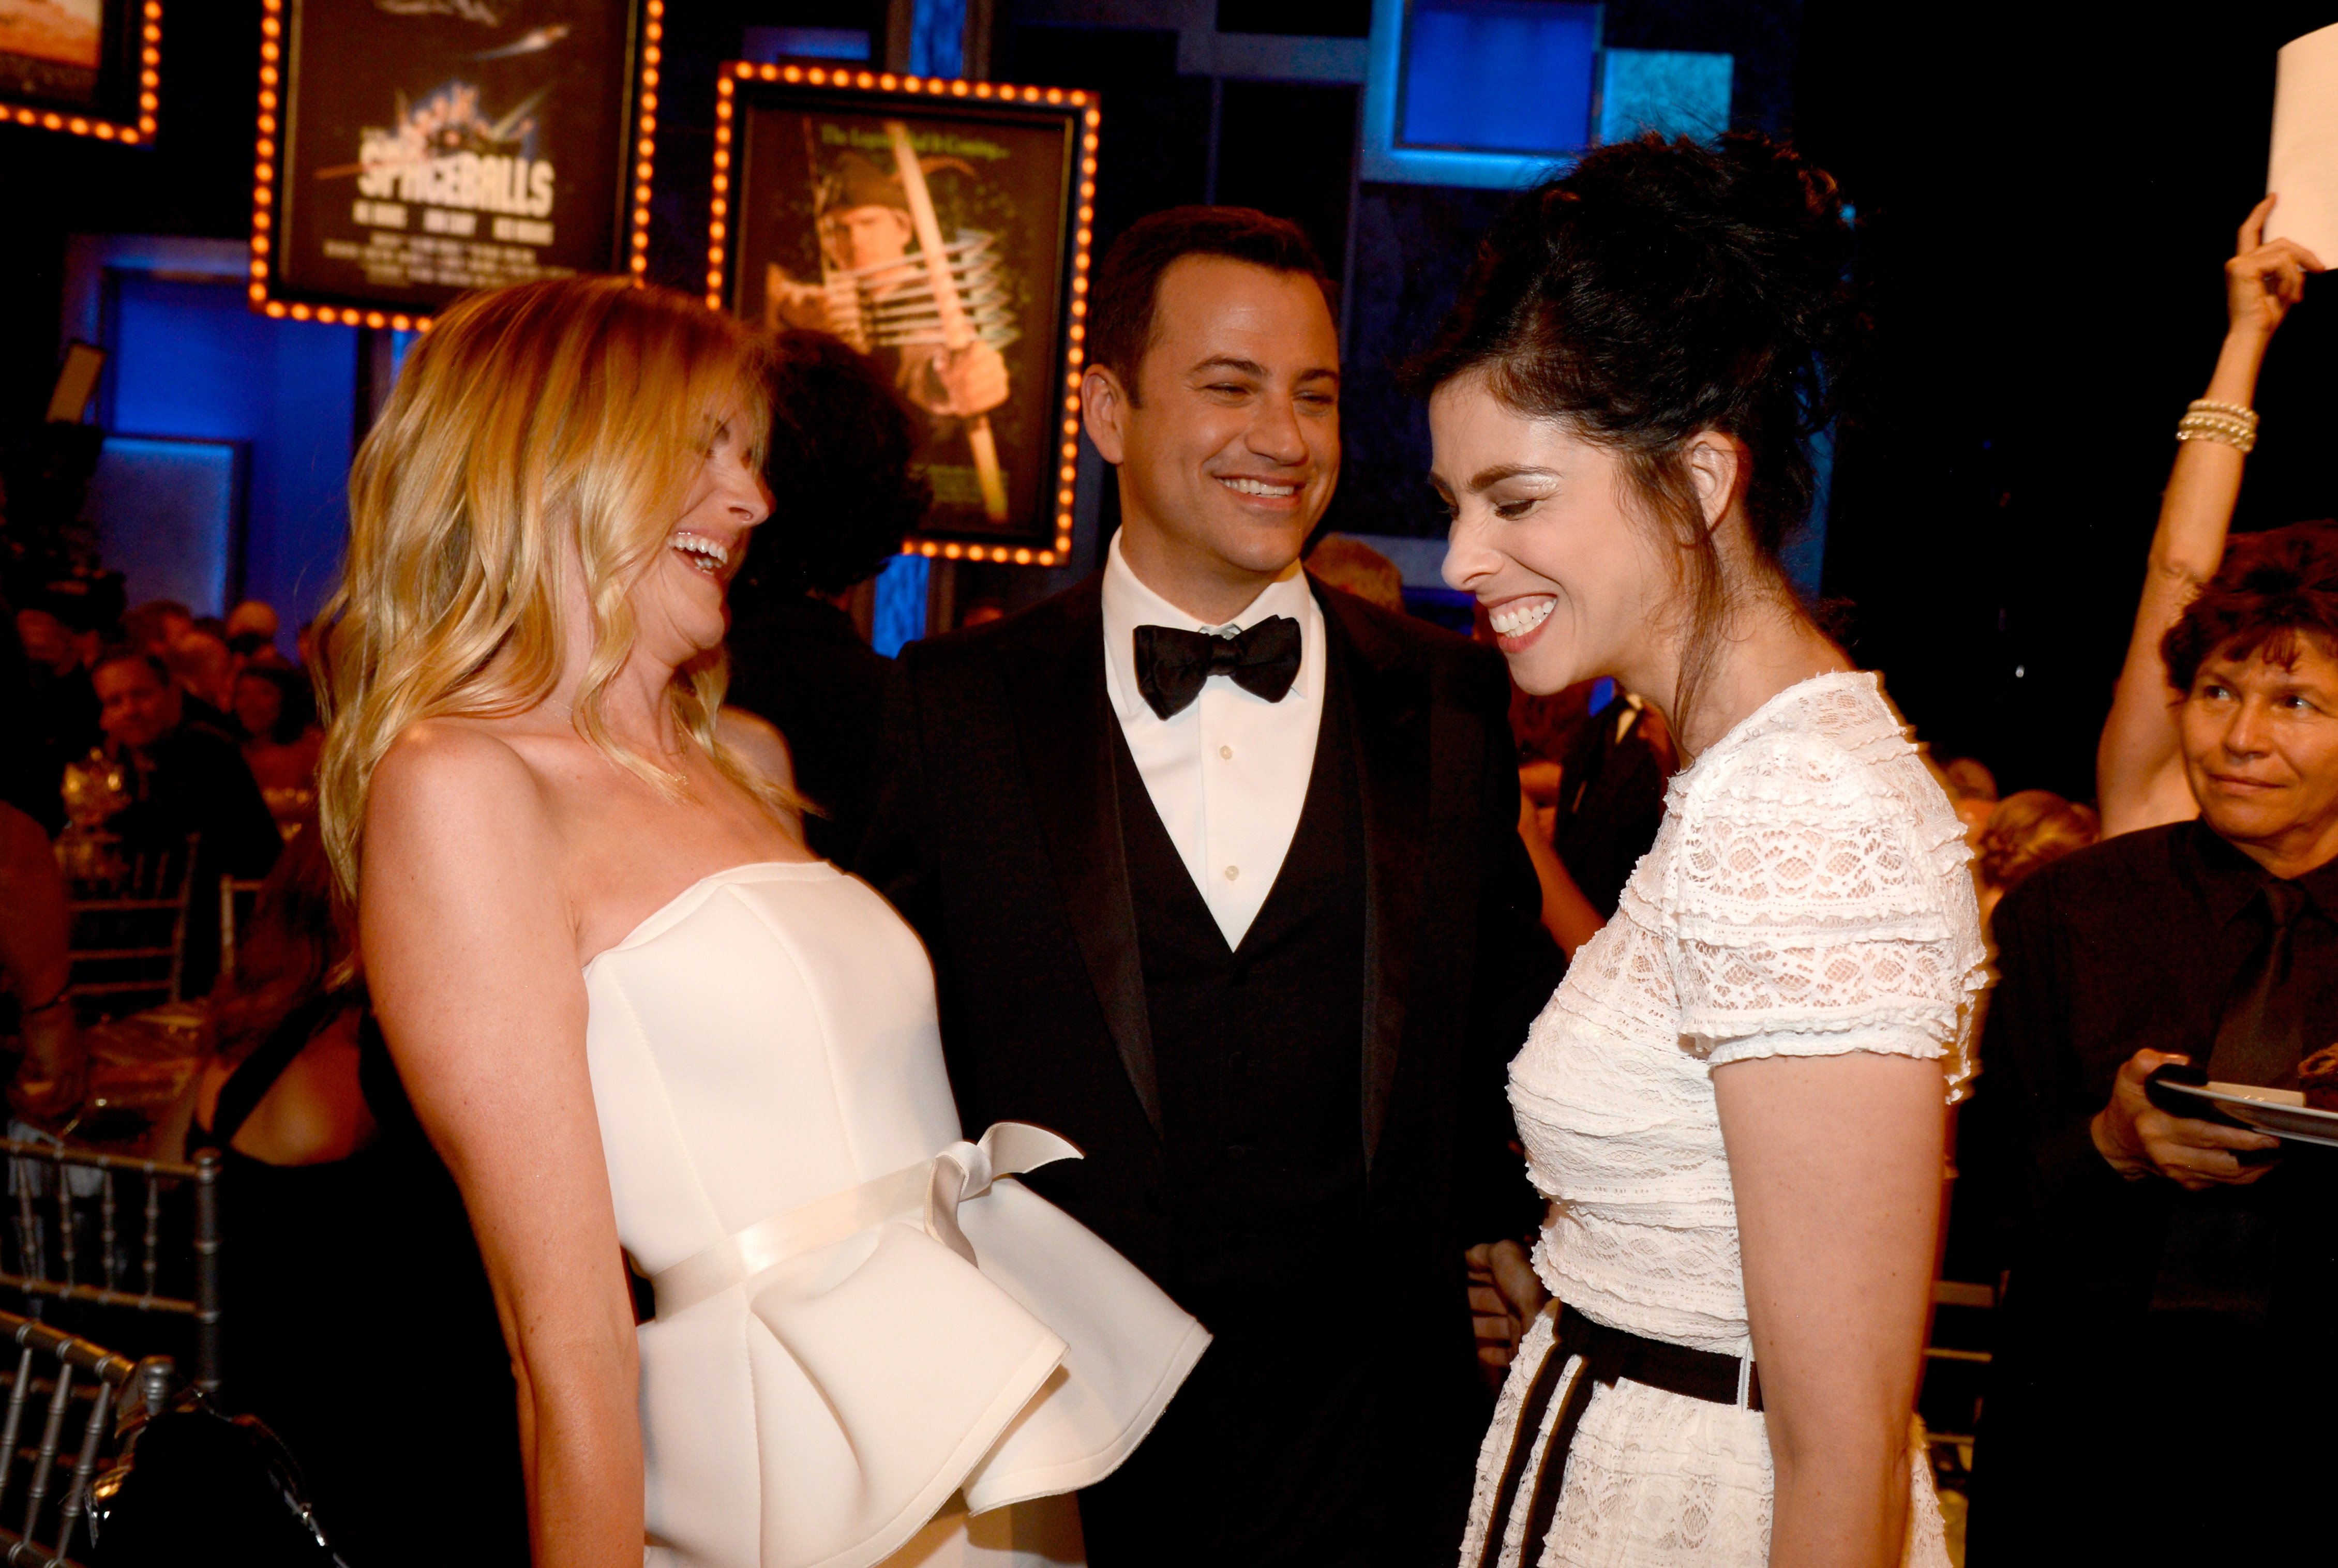 Molly McNeynie and her husband Jimmy Kimmel laugh with Sarah Silverman in AFI